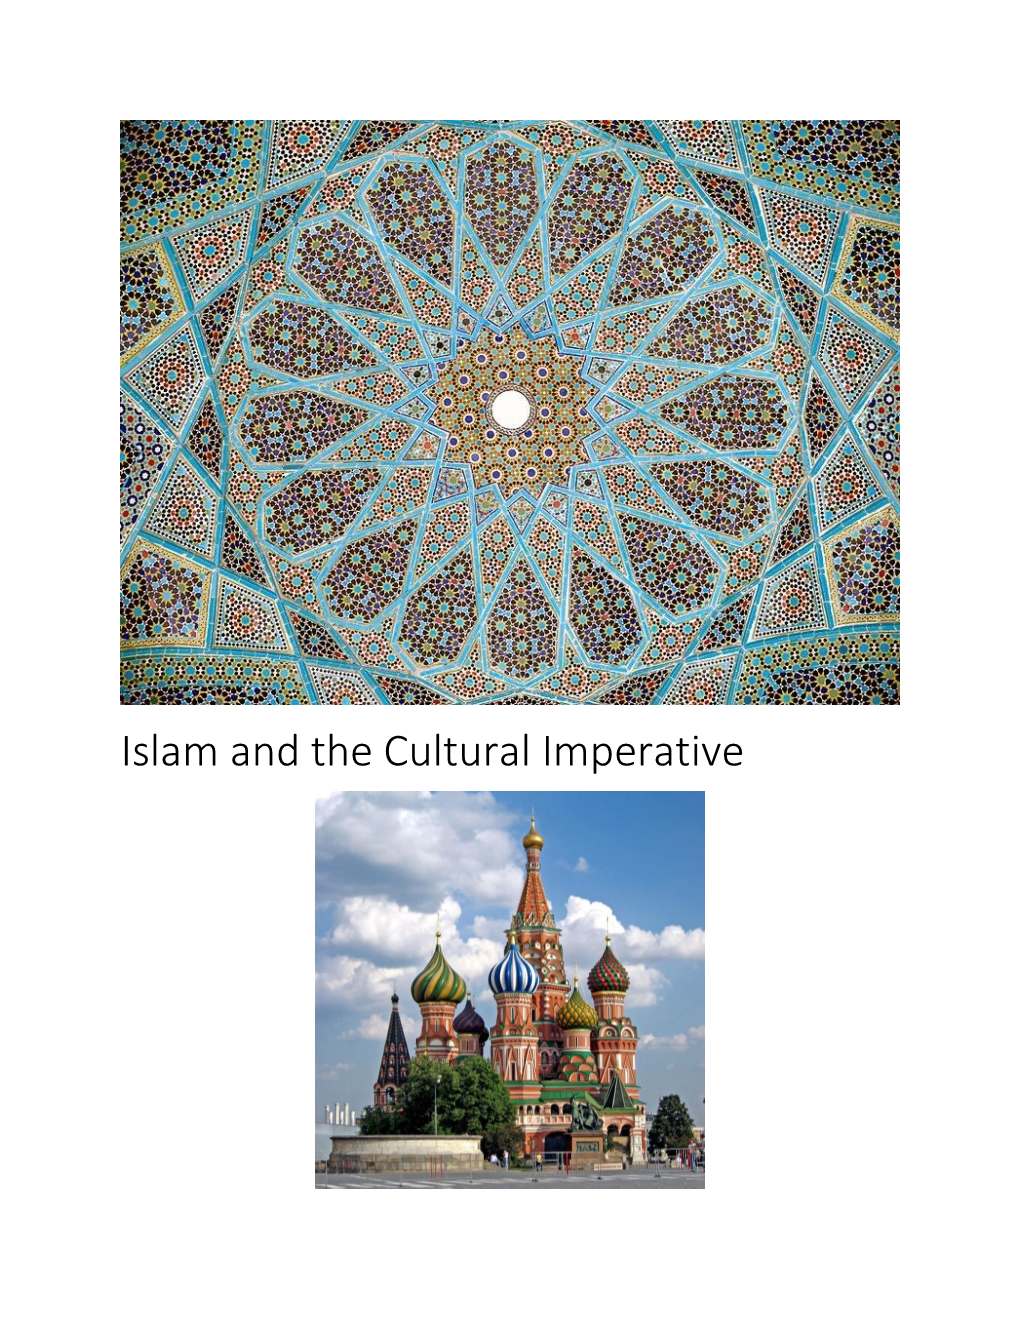 Islam and the Cultural Imperative